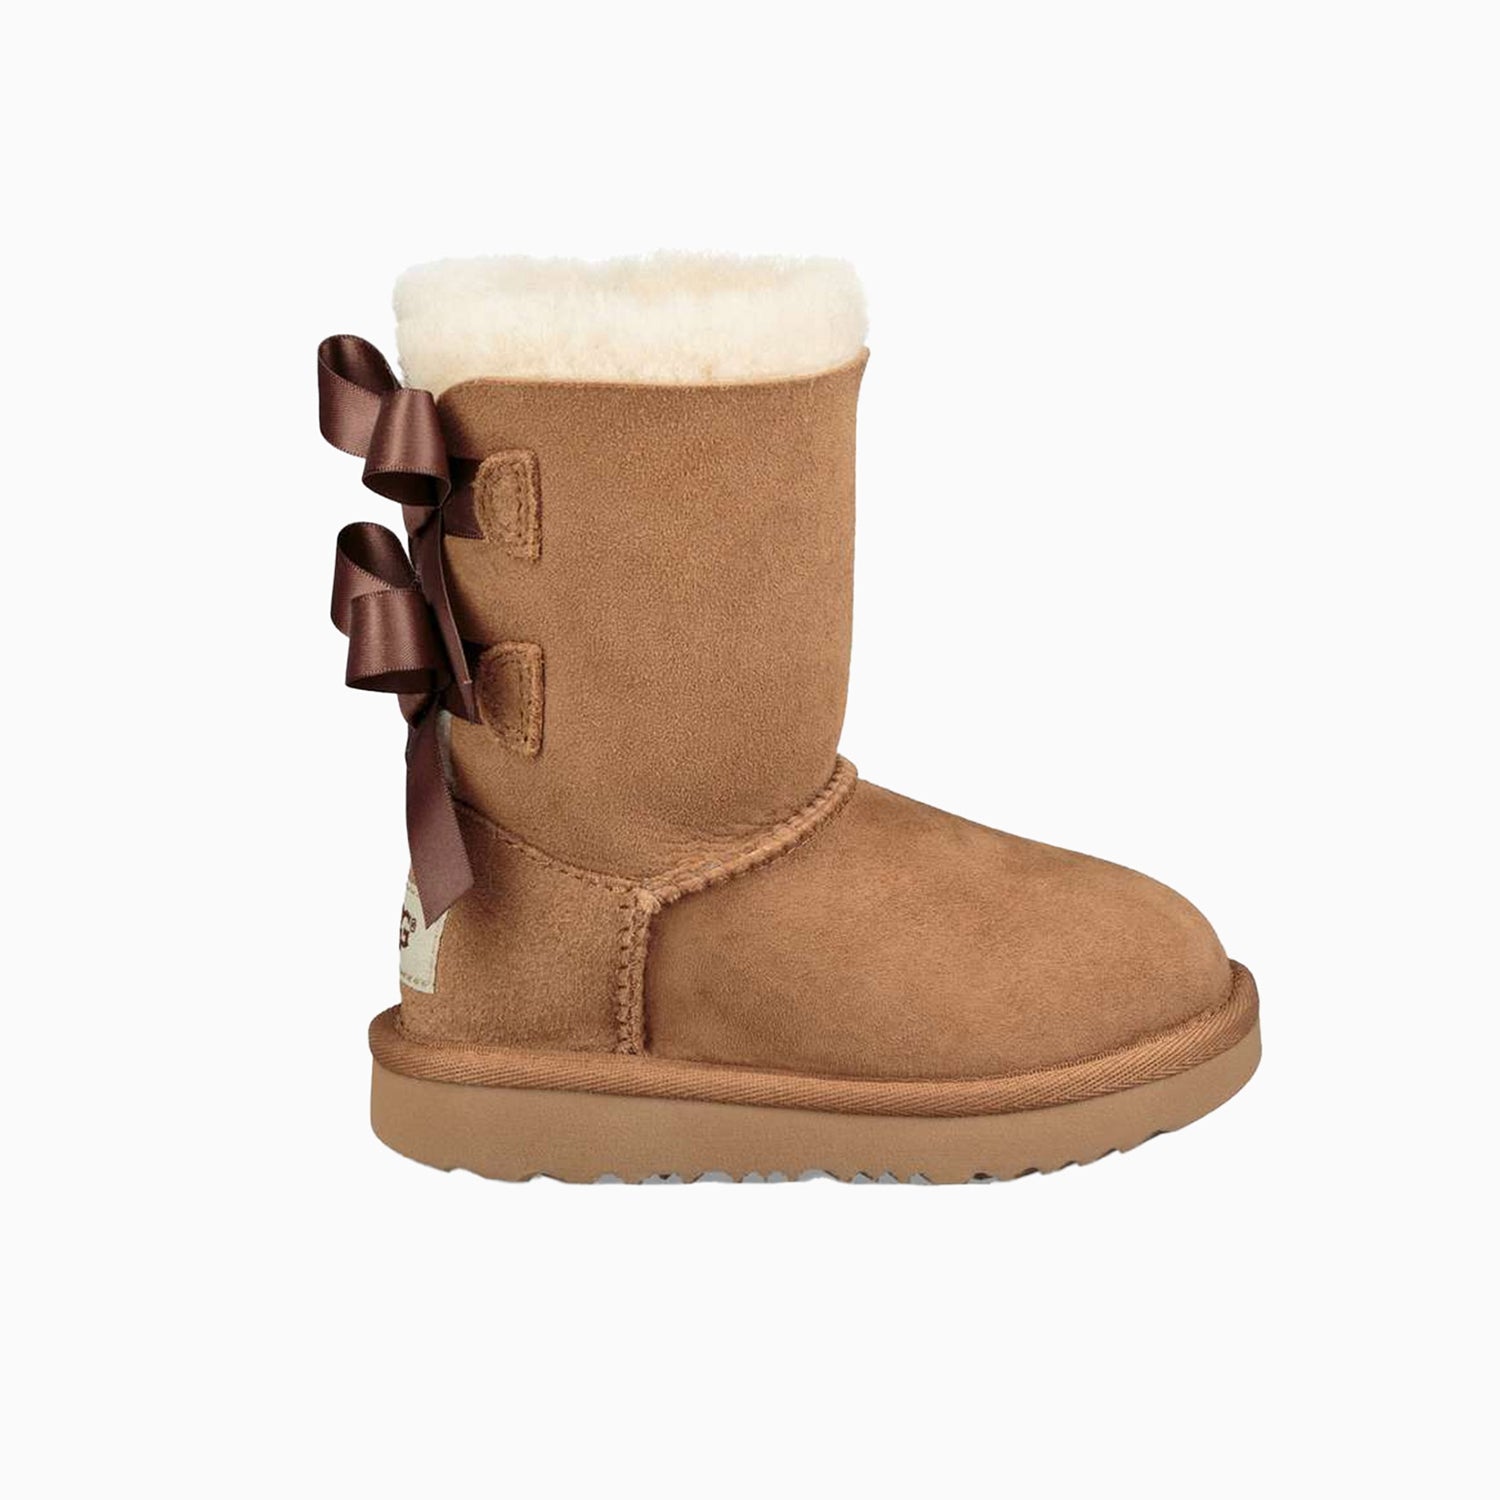 ugg-kids-bailey-bow-ii-toddler-boot-1017394t-che